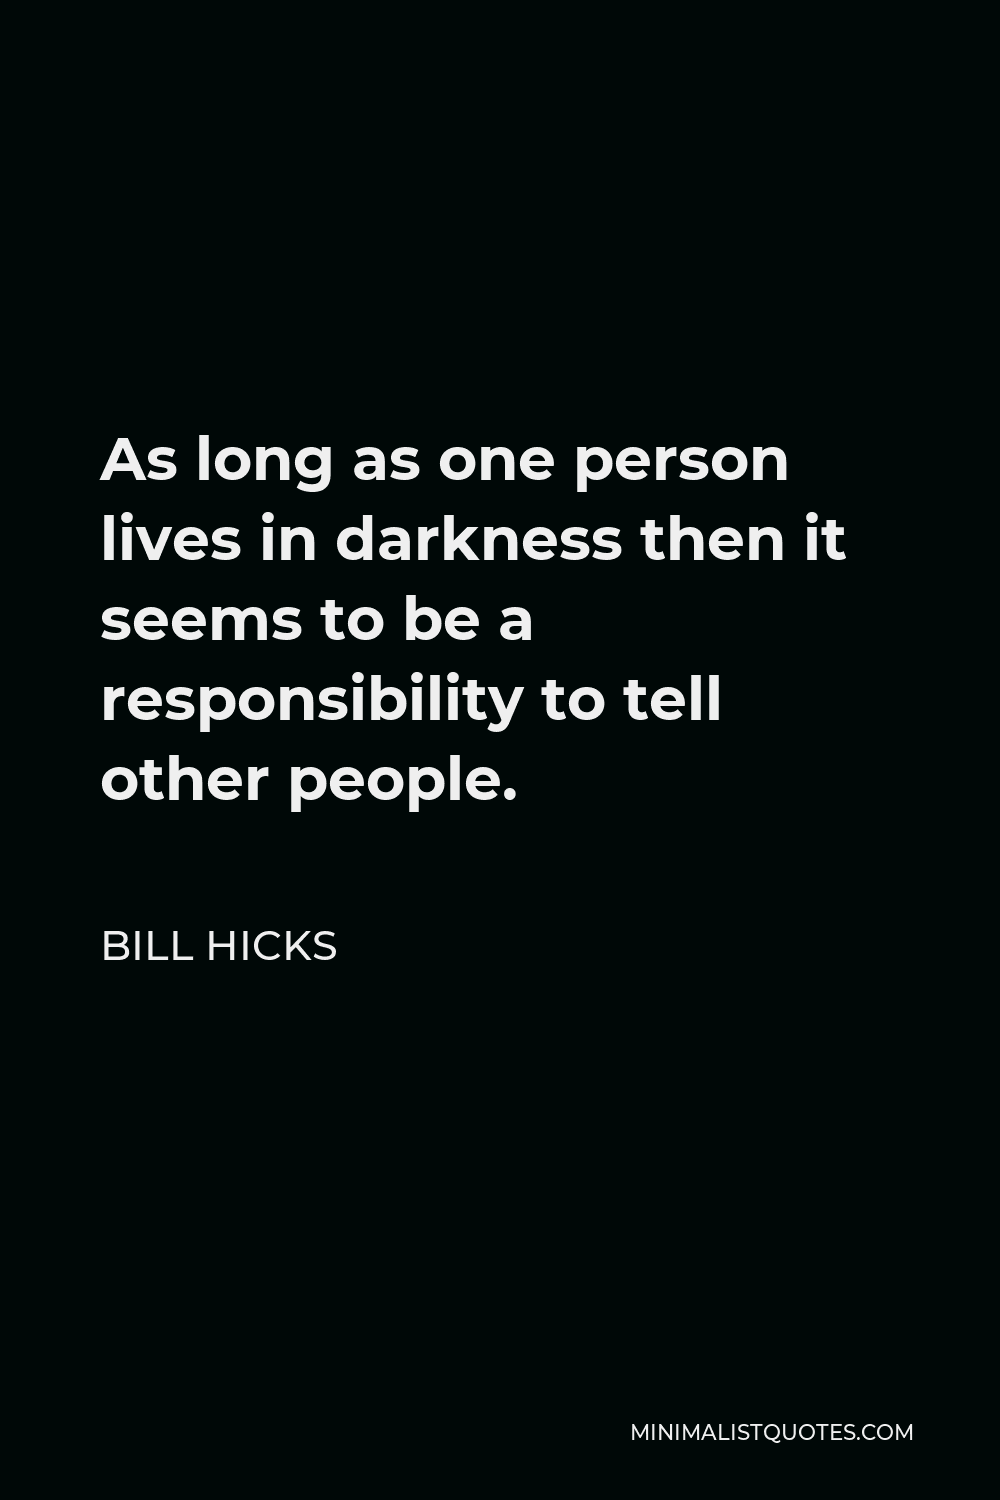 Bill Hicks Quote - As long as one person lives in darkness then it seems to be a responsibility to tell other people.